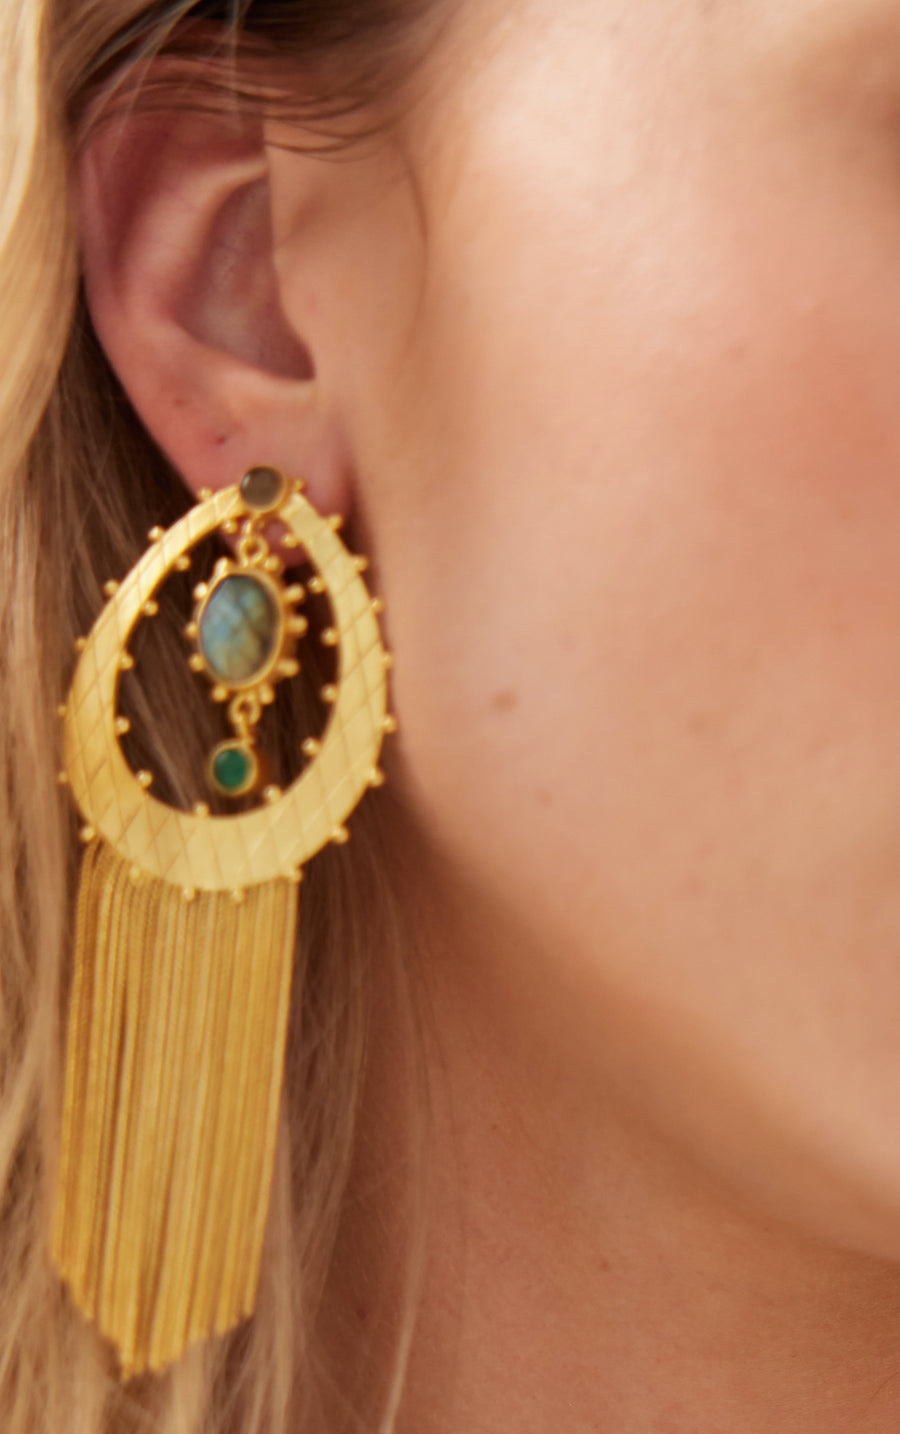 Quilted Fringe Earrings